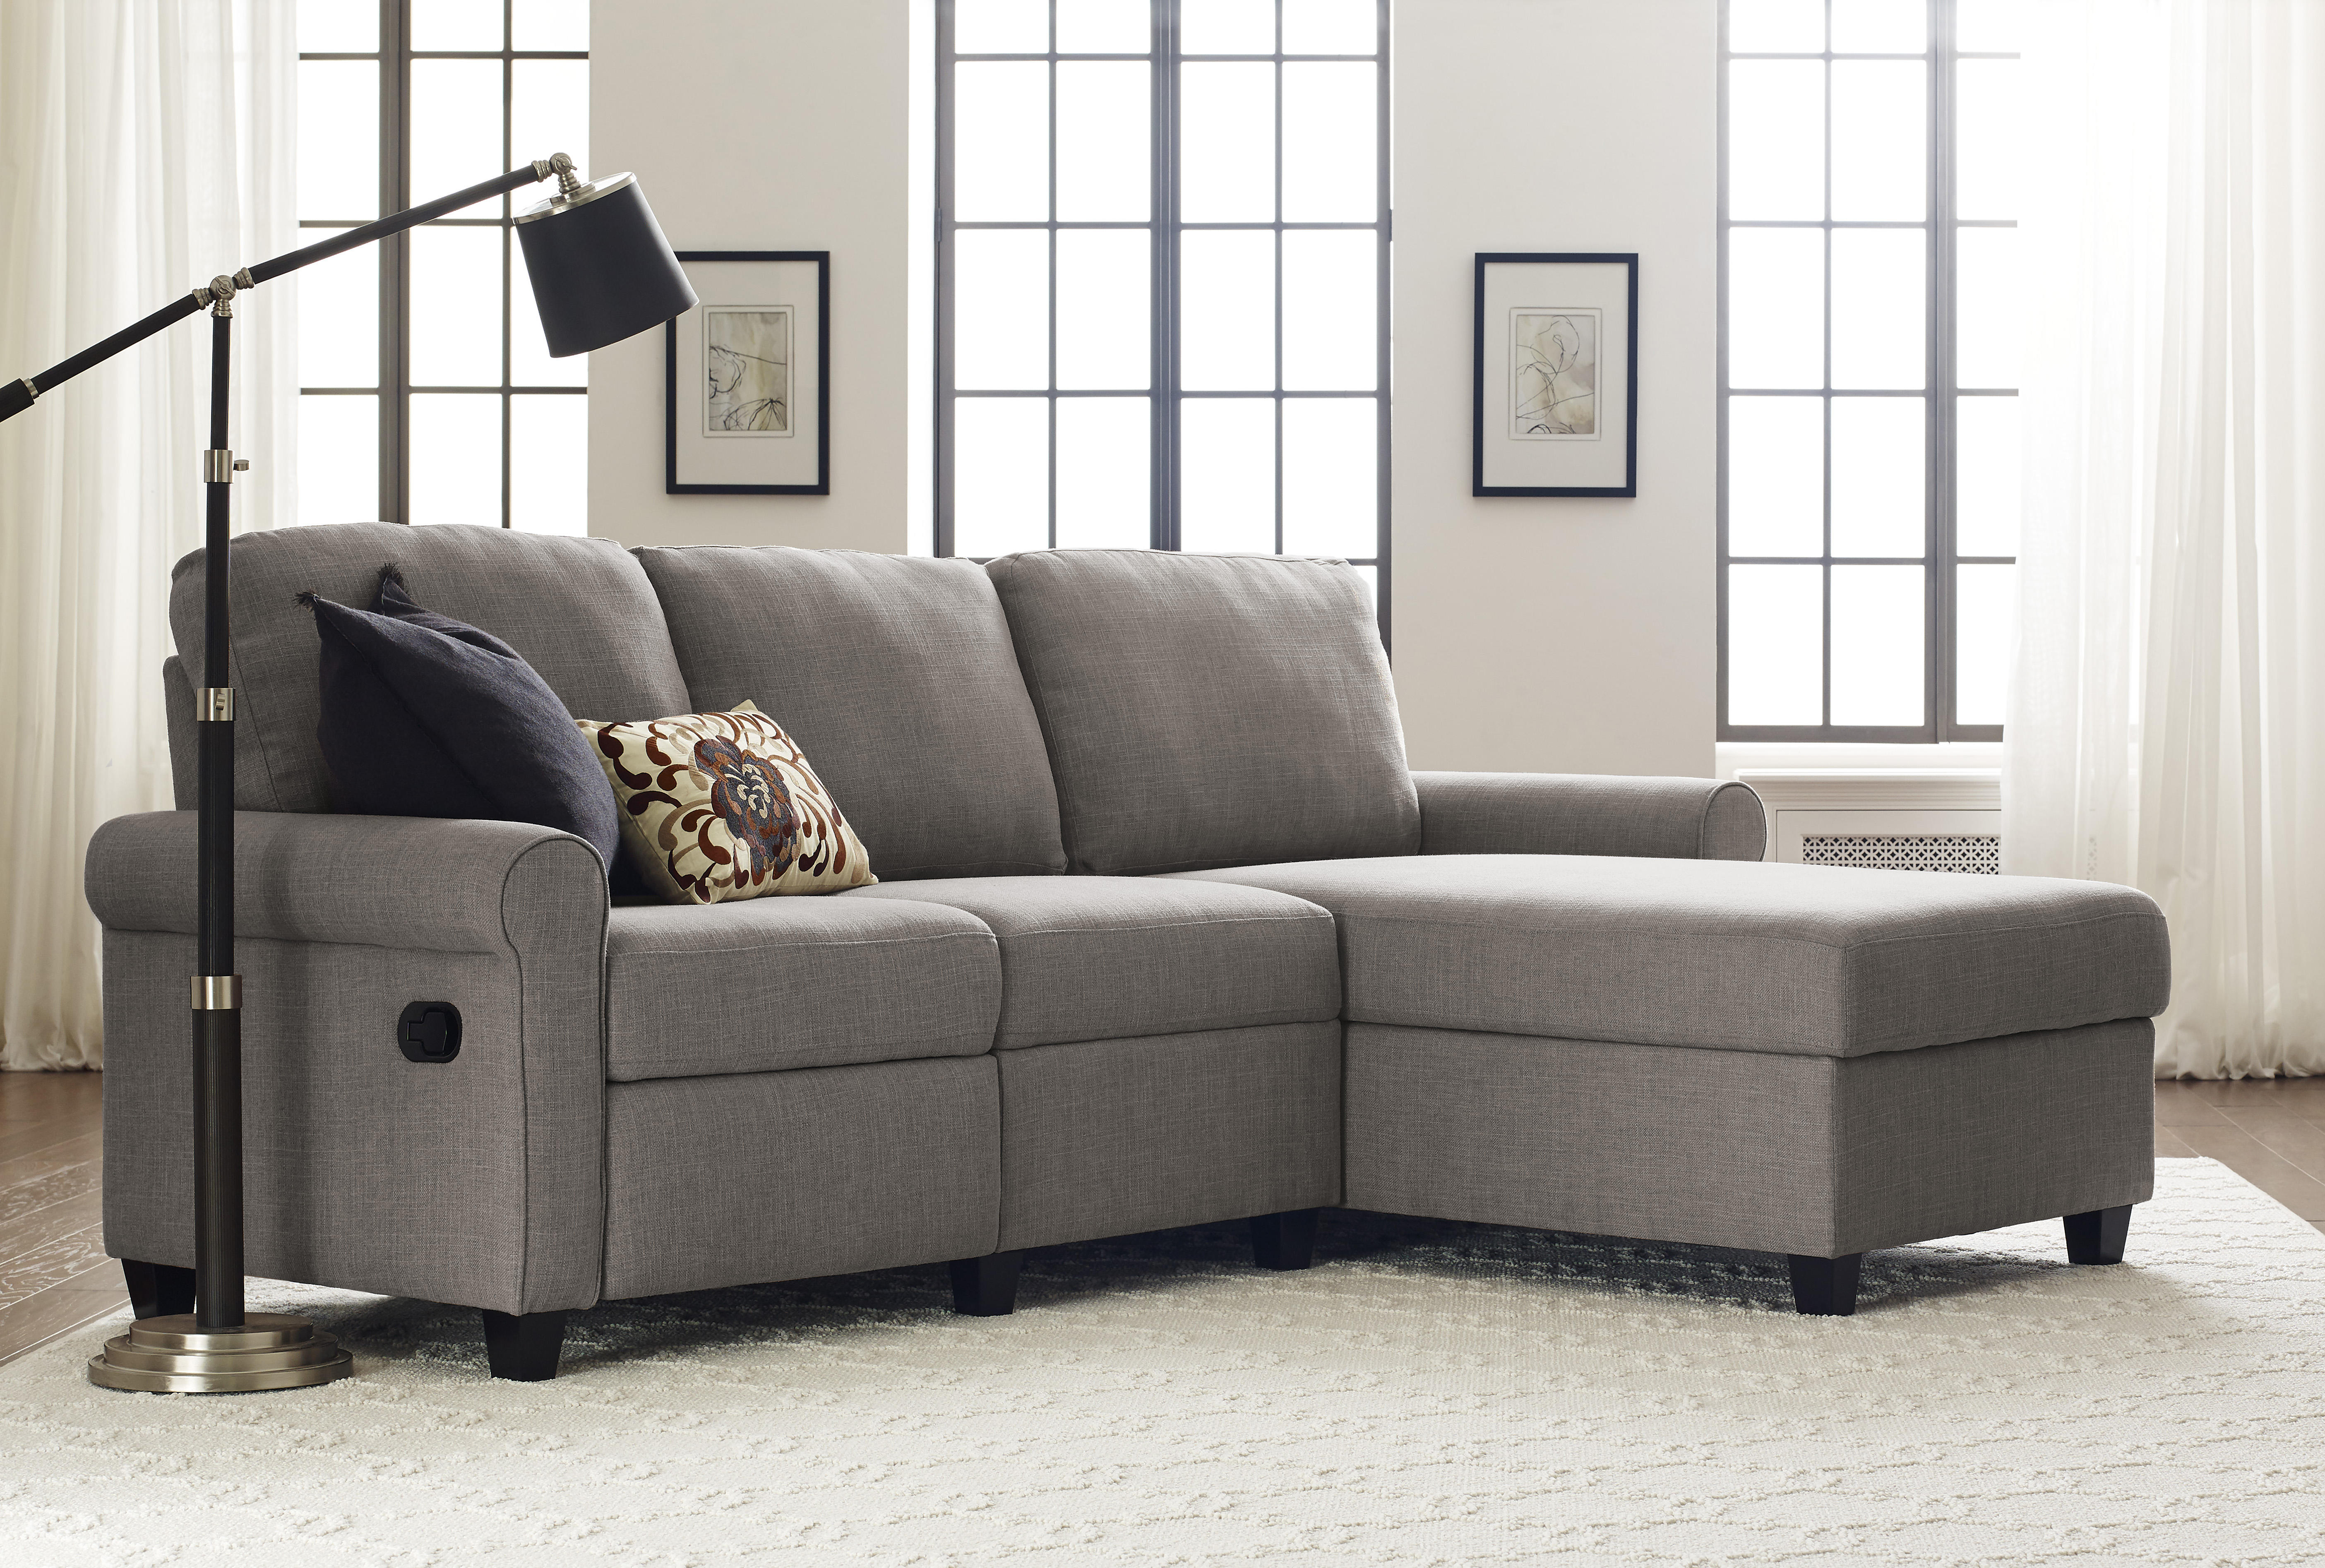 Serta Copenhagen Reclining Sectional with Right Storage Chaise - Gray - image 5 of 10